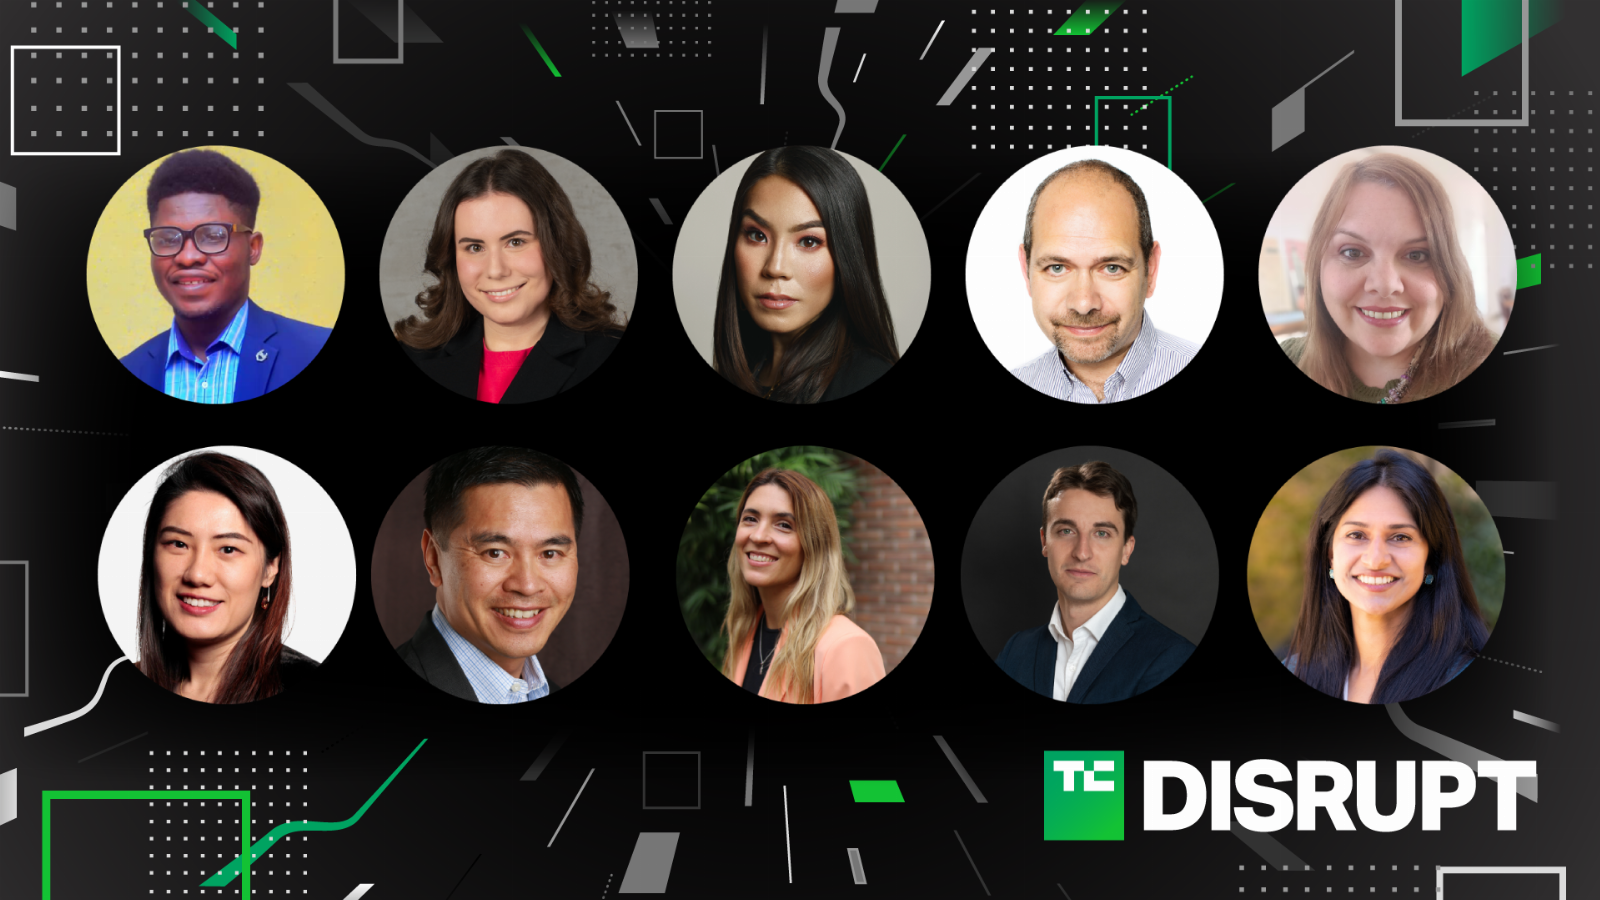 Meet the Disrupt Audience Choice roundtable winners